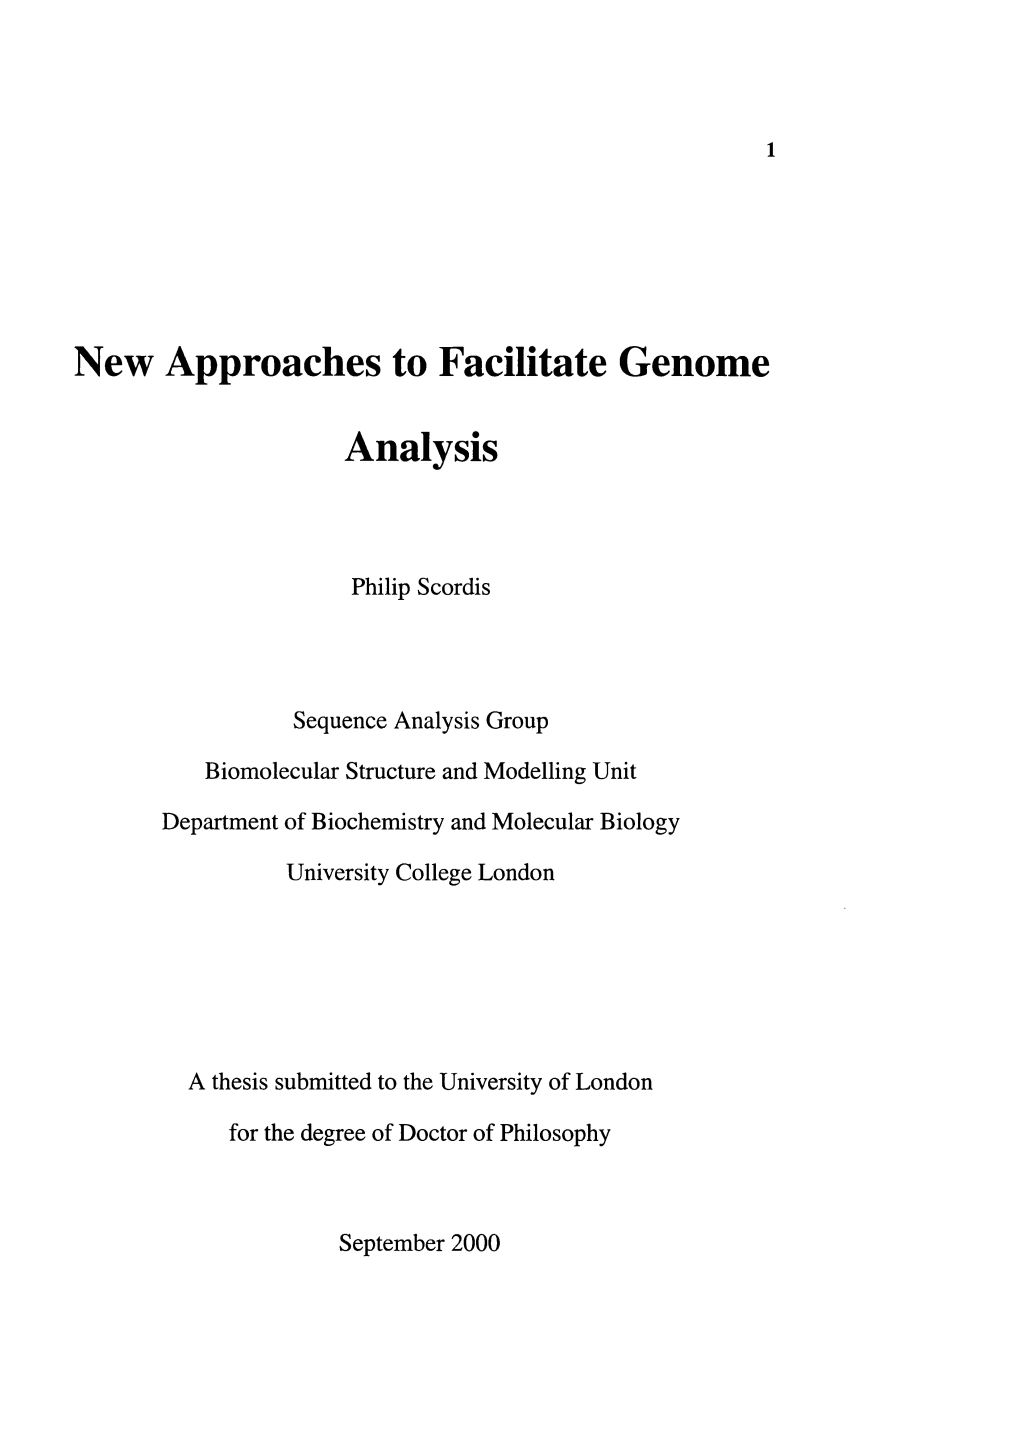 New Approaches to Facilitate Genome Analysis